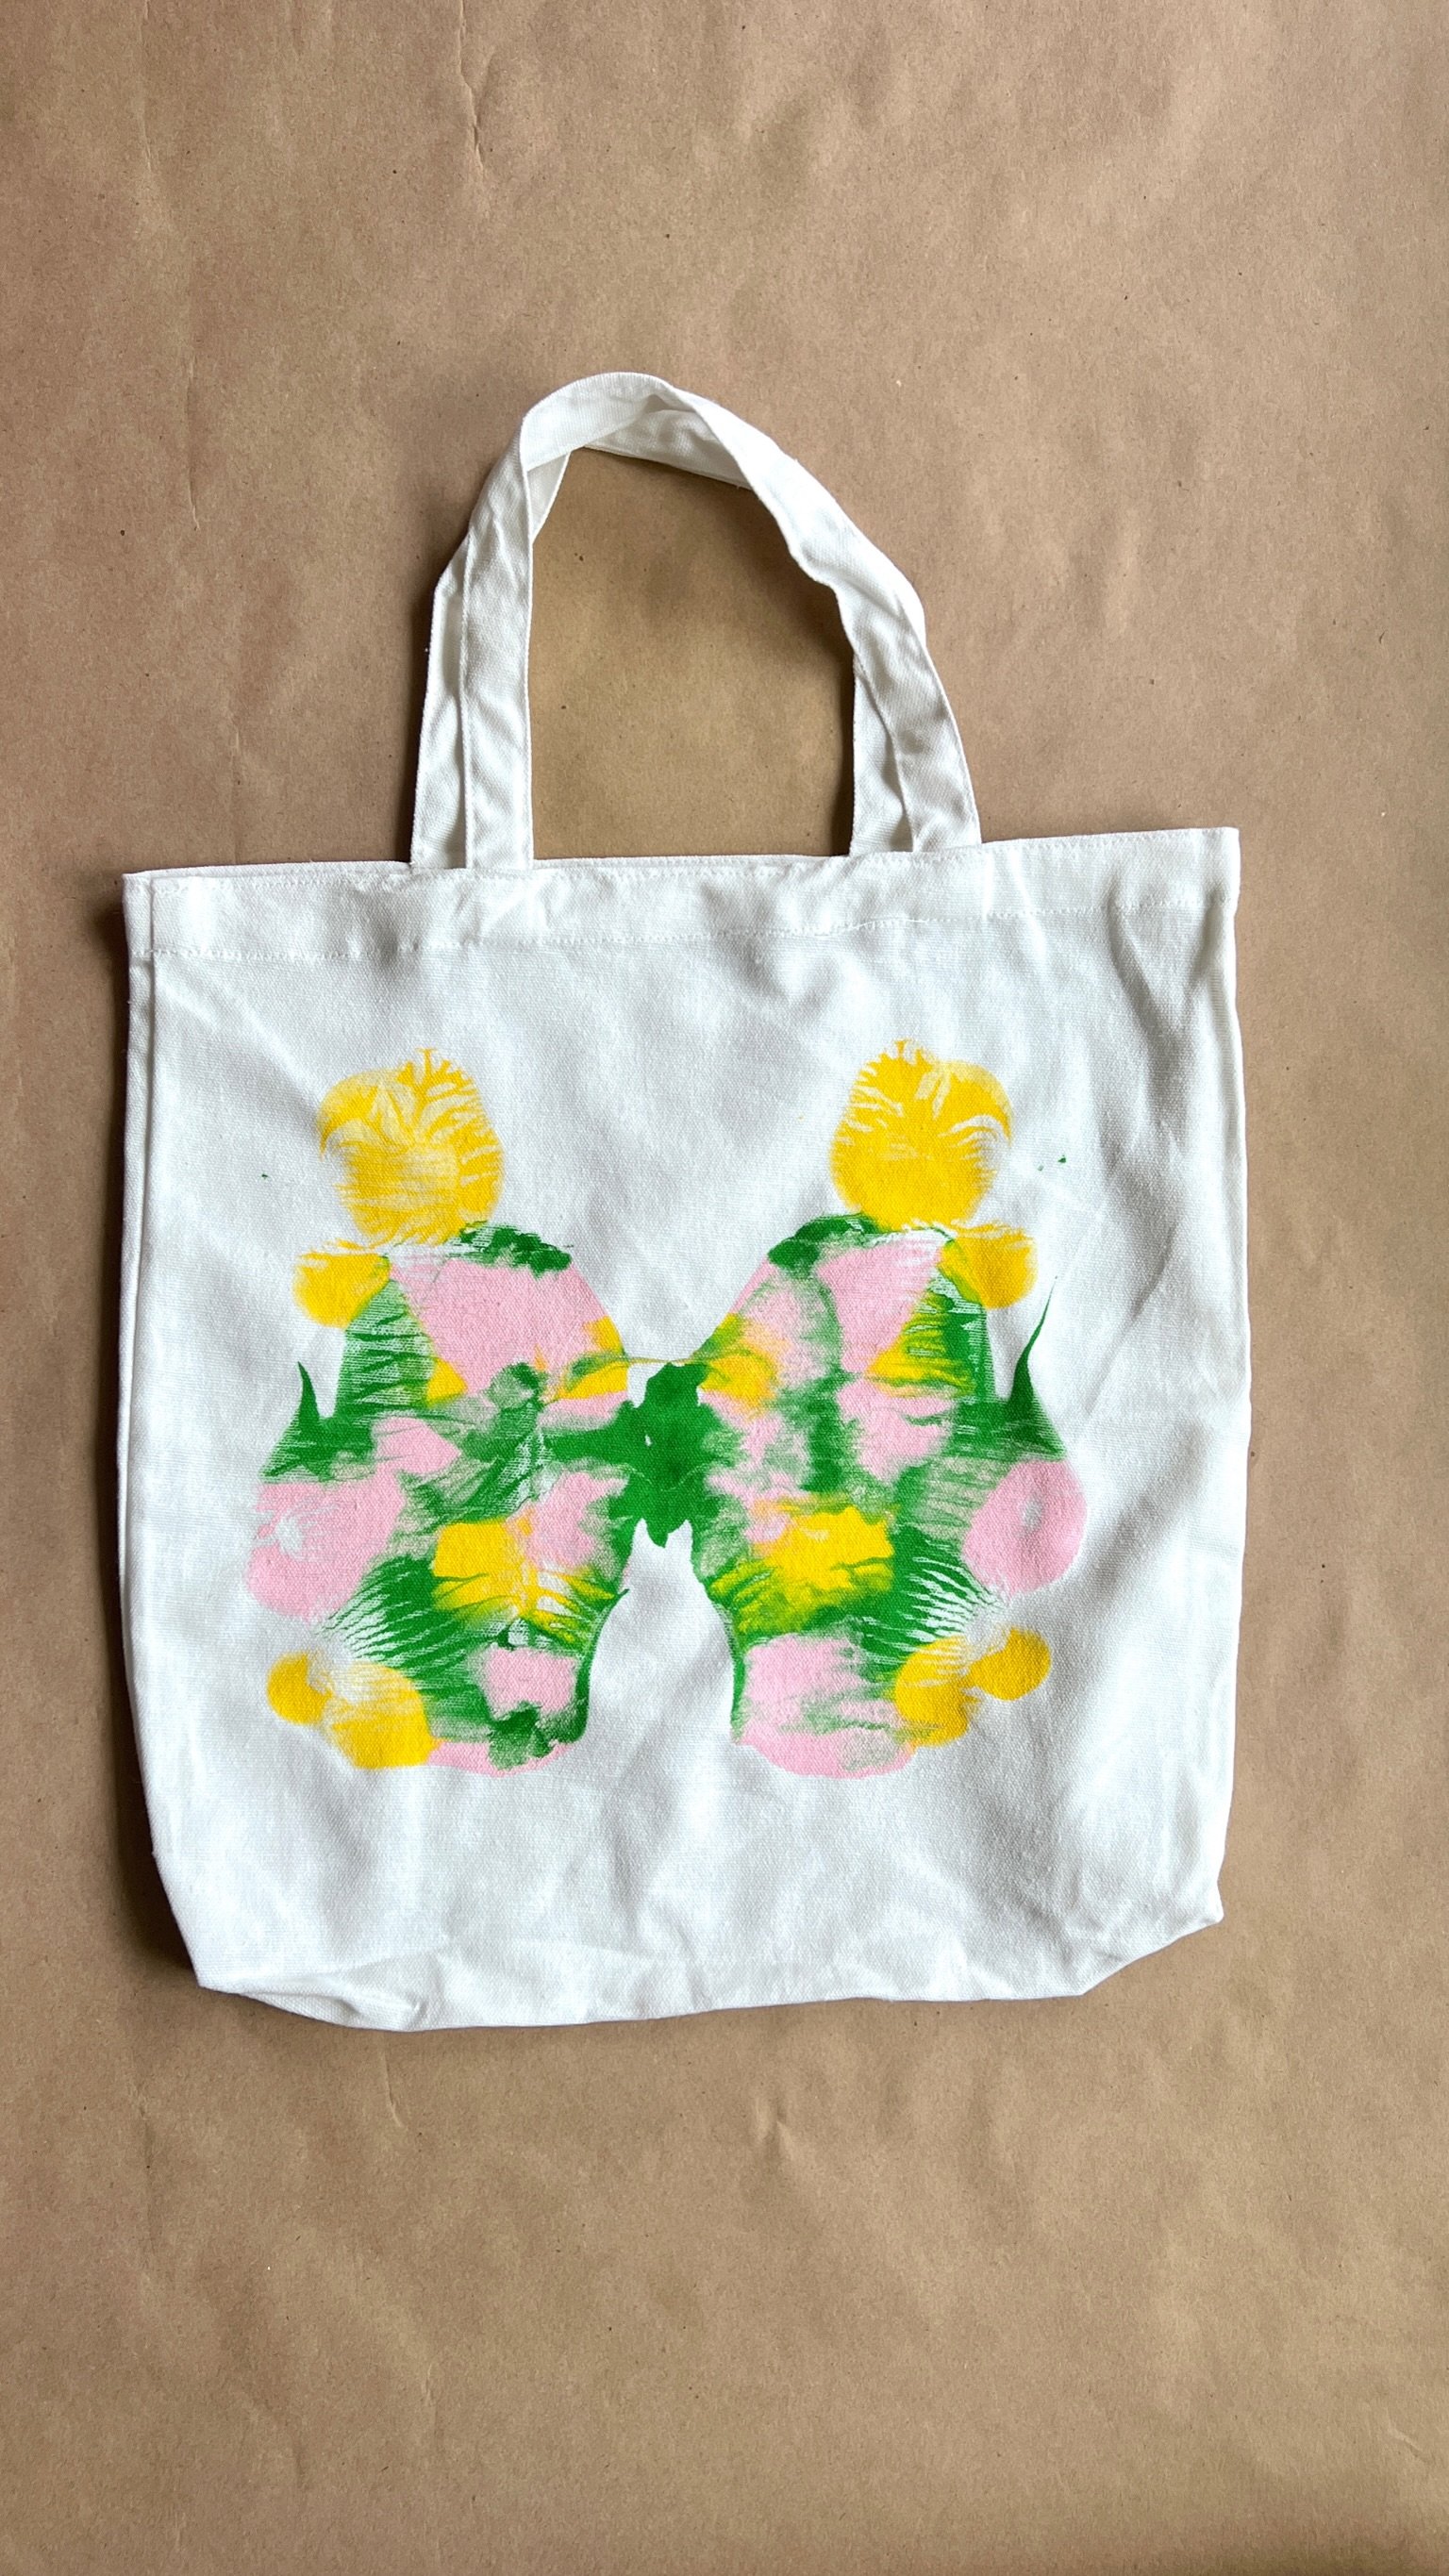 Learn How to Make an Ink Blot Tote Bag! (Our Super Fun Craft for Alt ...